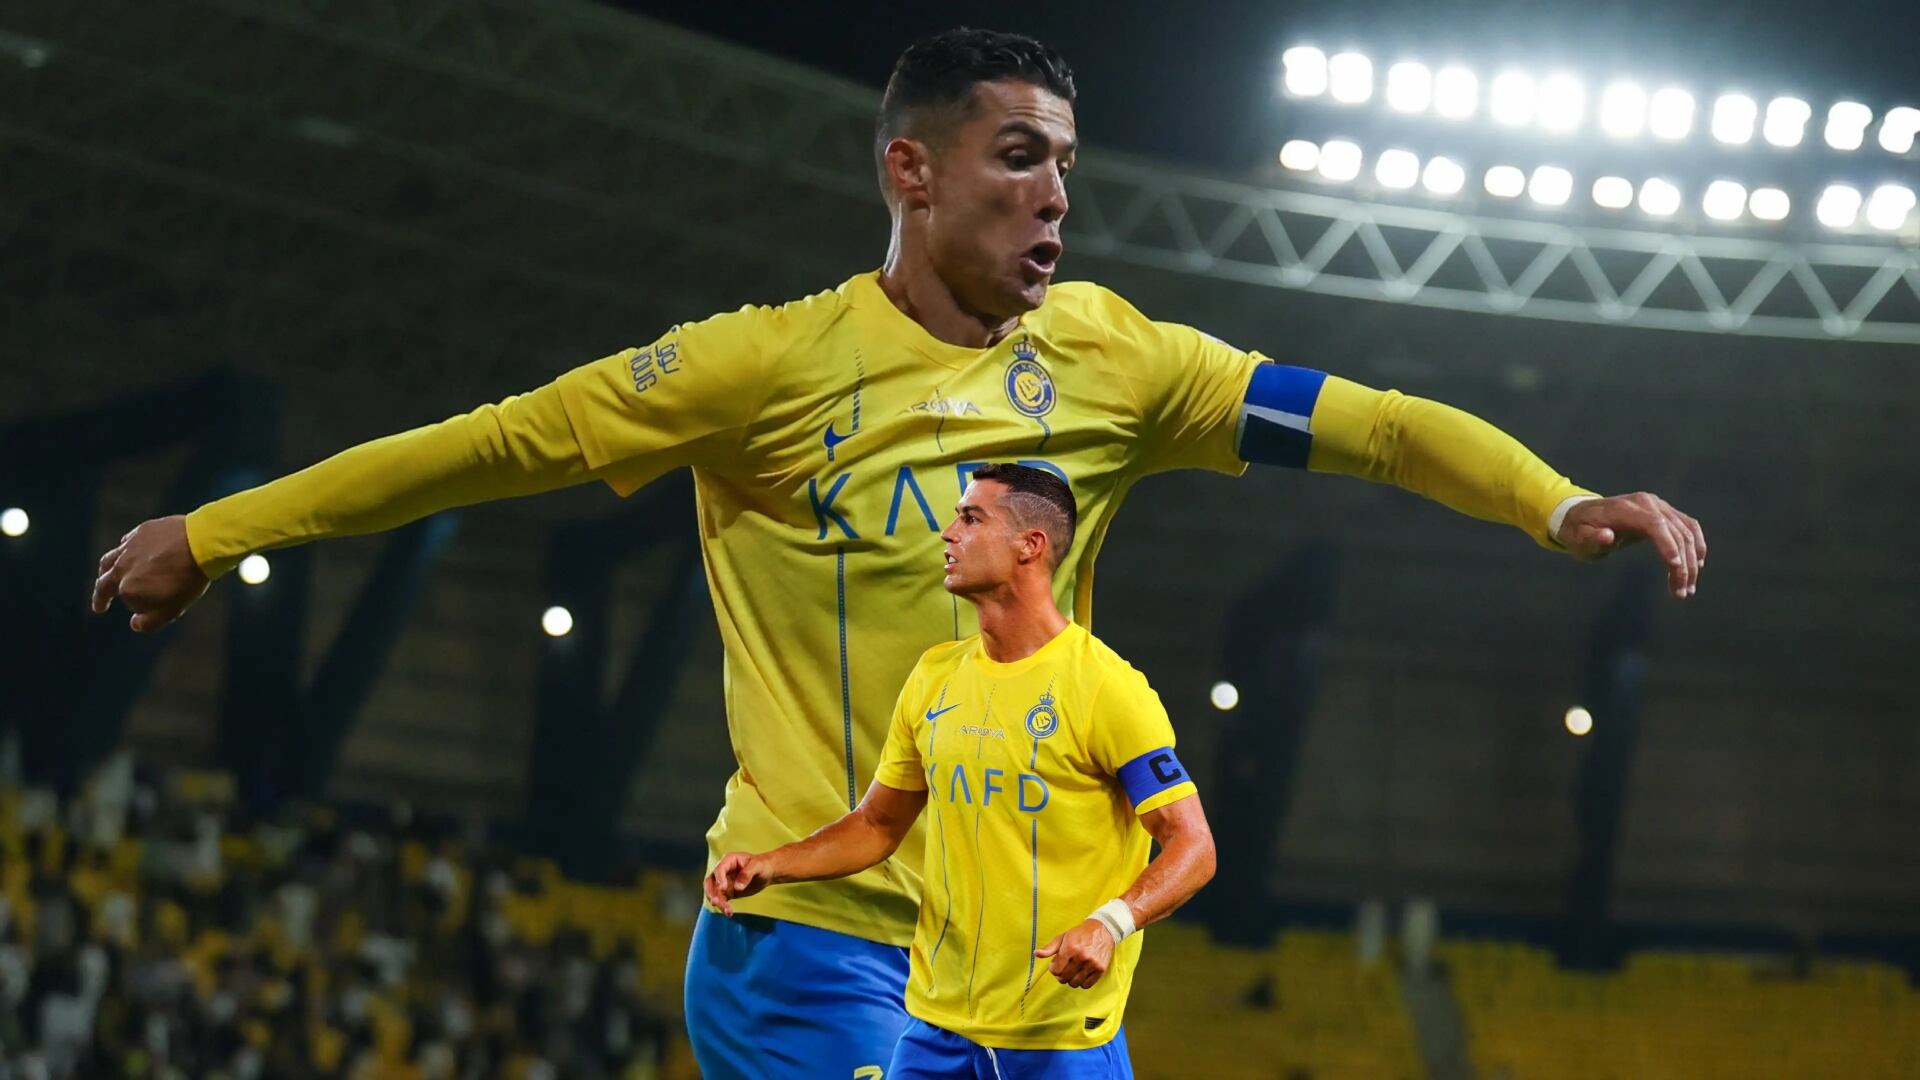 (VIDEO) It's not the SIUU, the new celebration of Cristiano Ronaldo at Al Nassr that went viral